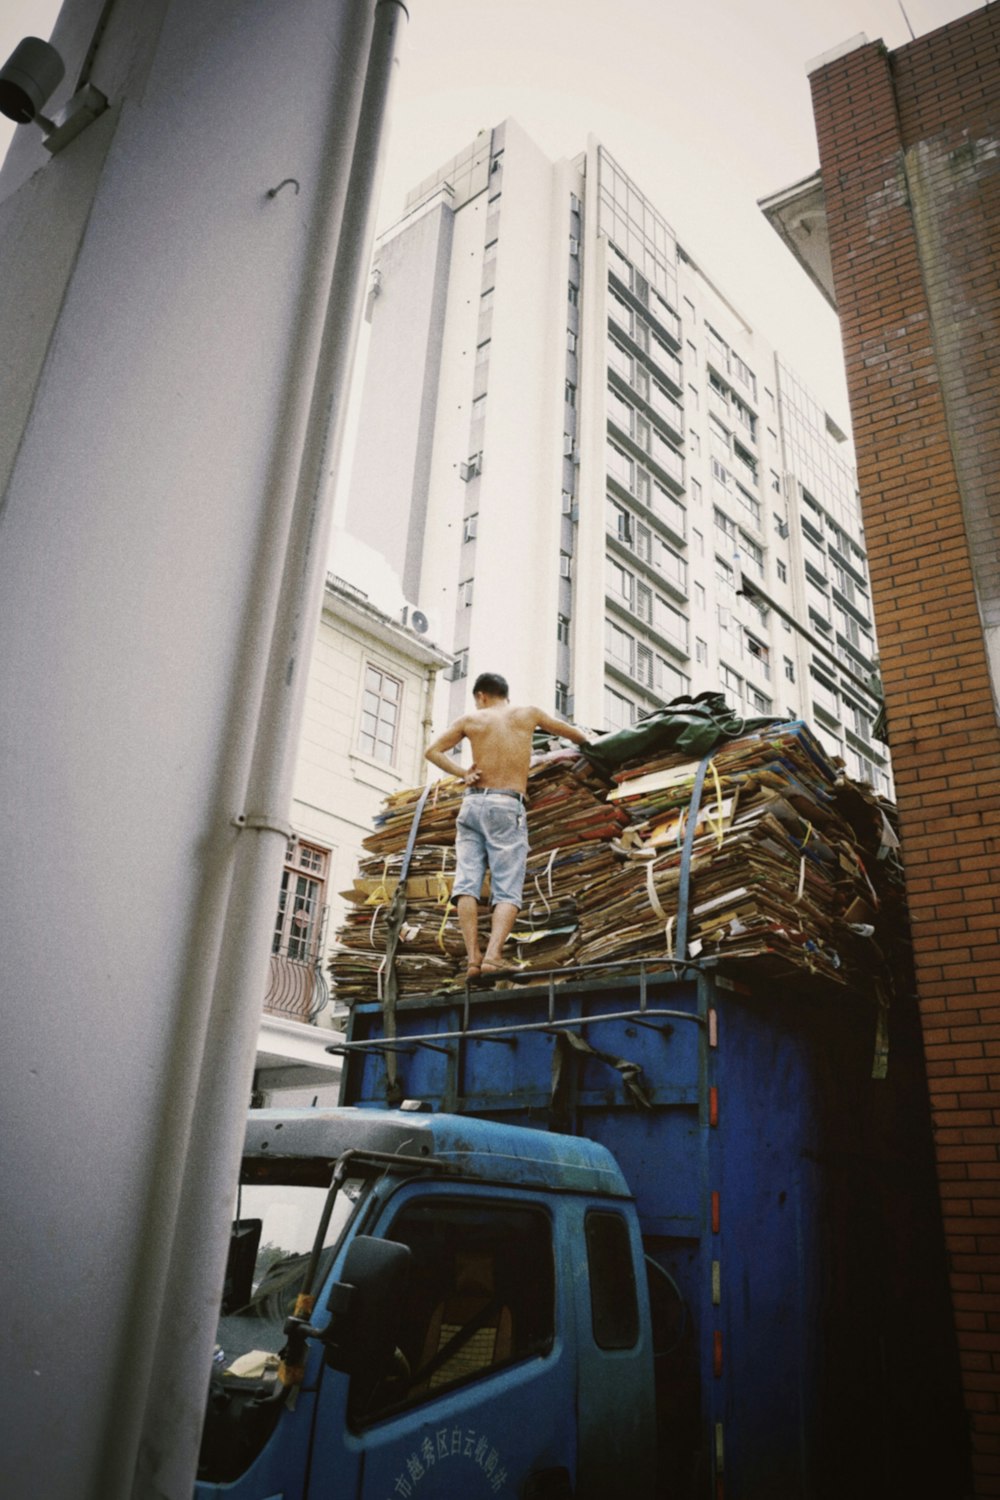 a man standing on top of a blue truck